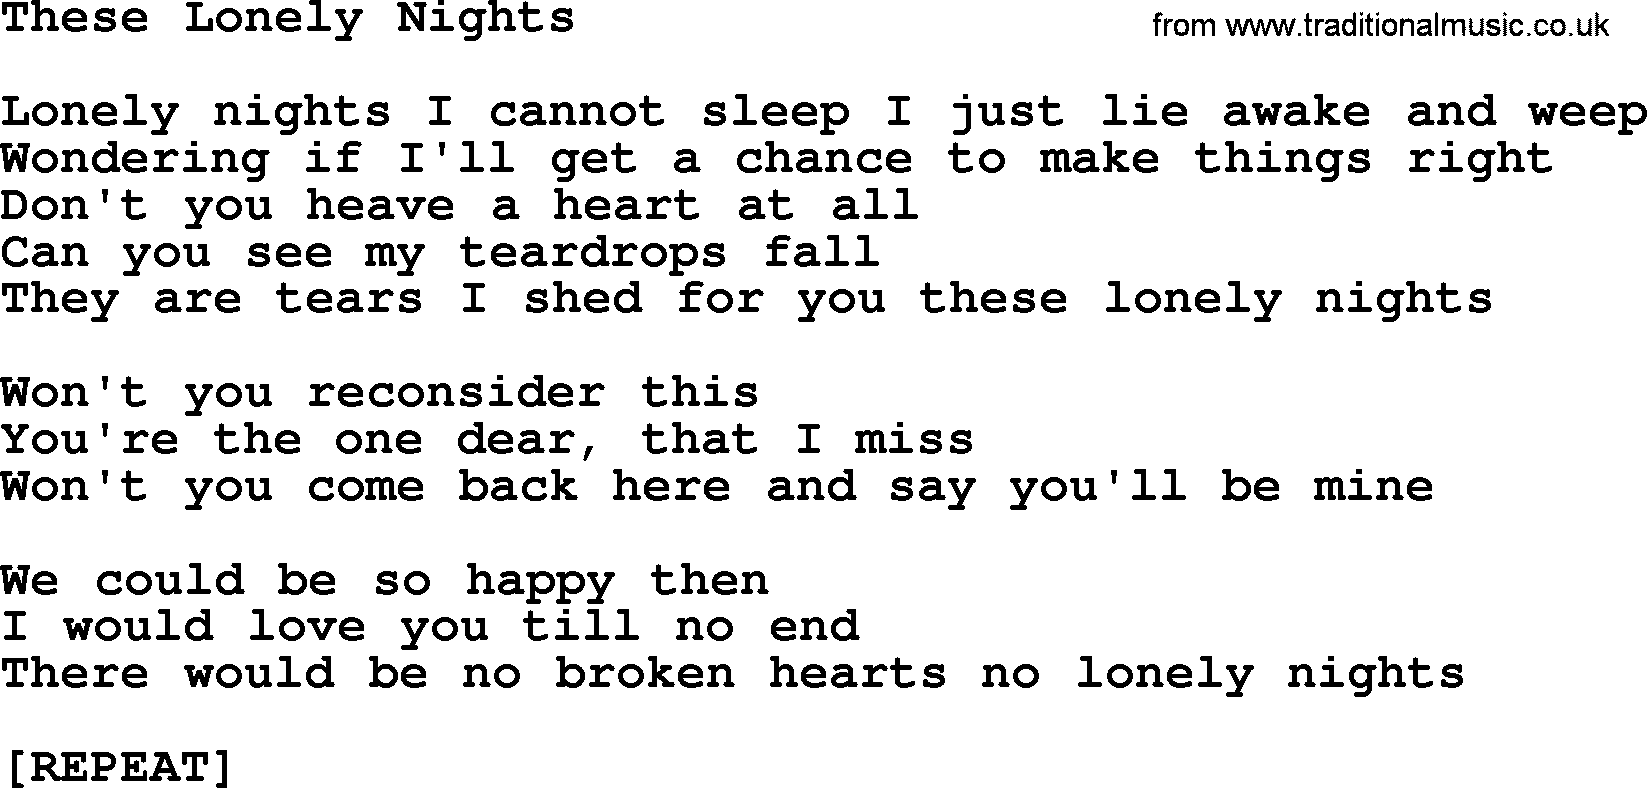 Willie Nelson song: These Lonely Nights lyrics